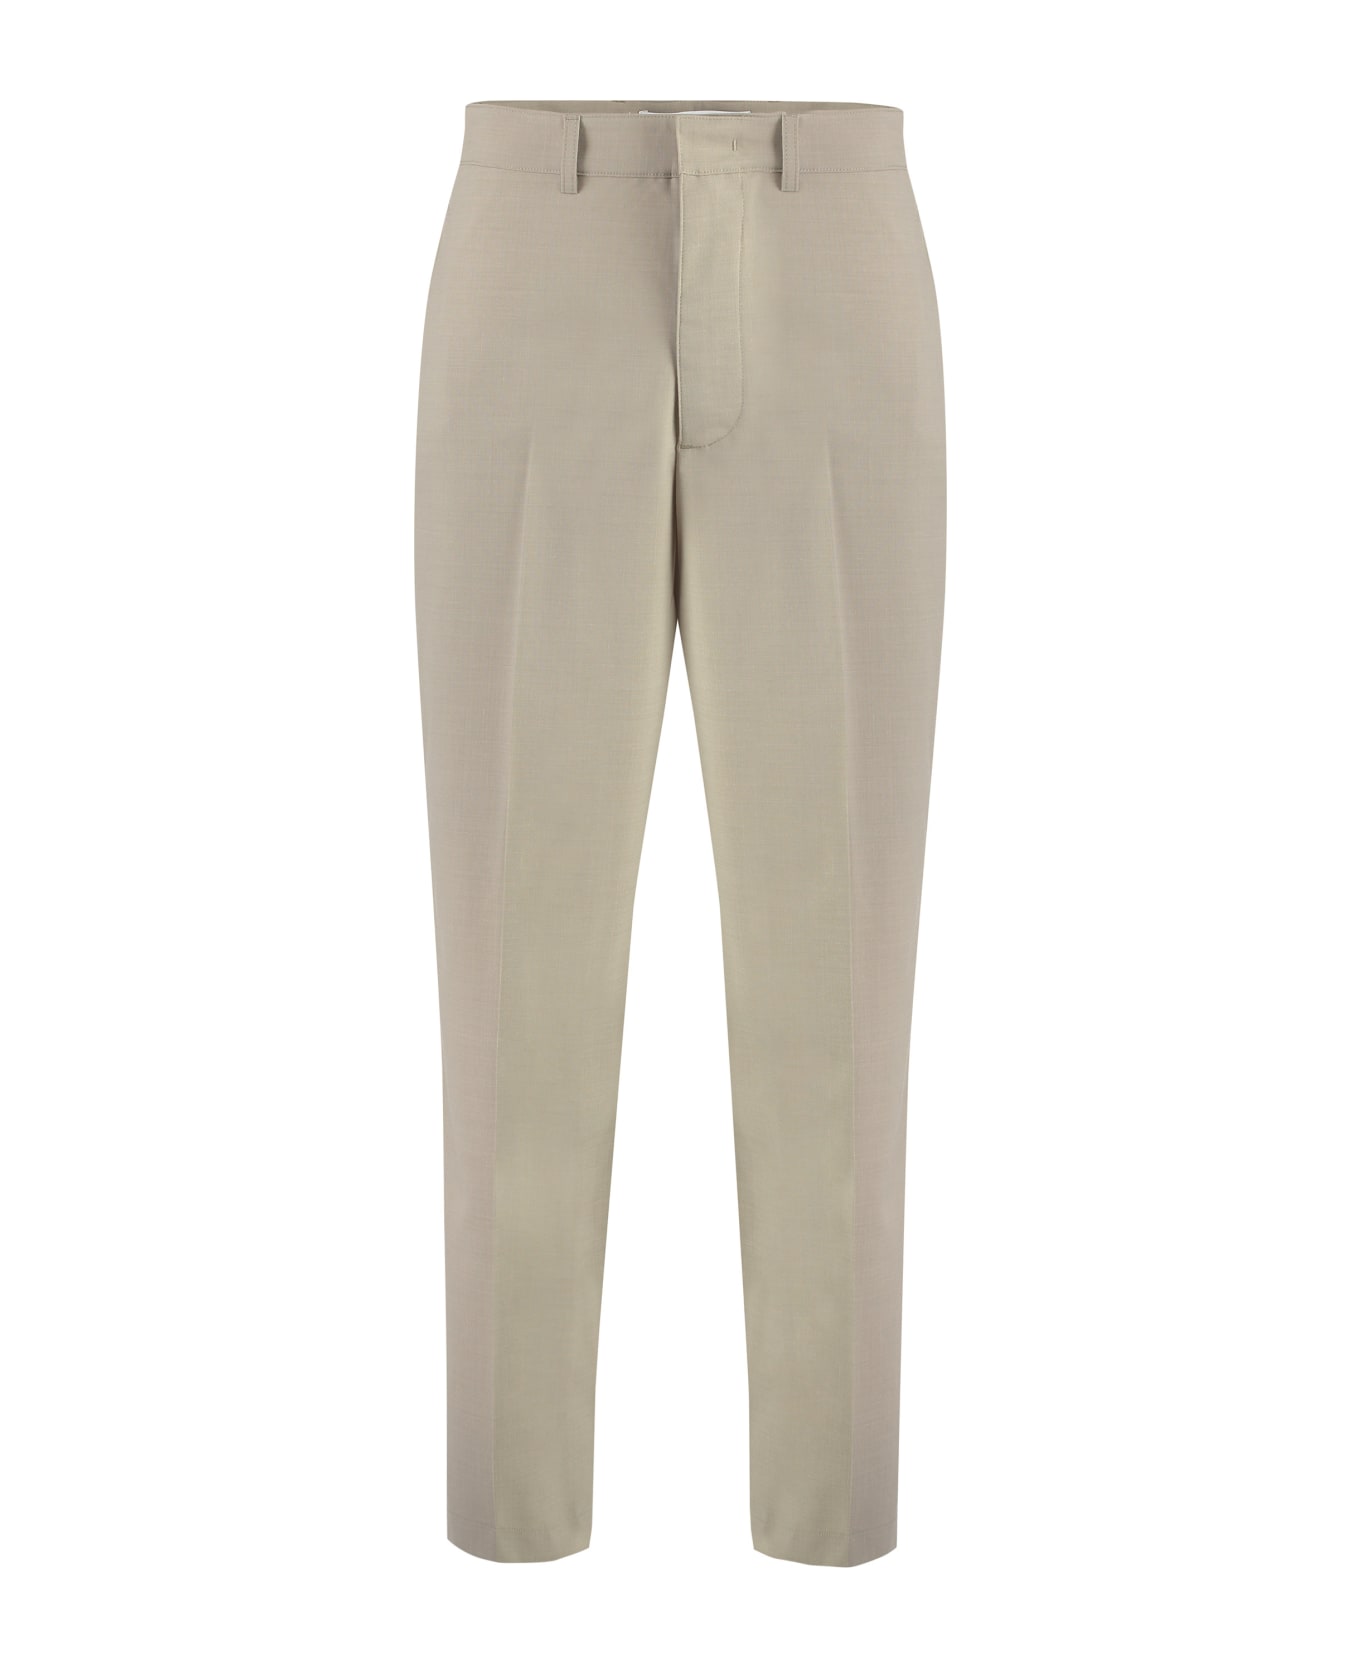 Department Five E-motion Wool Blend Trousers - Beige ボトムス